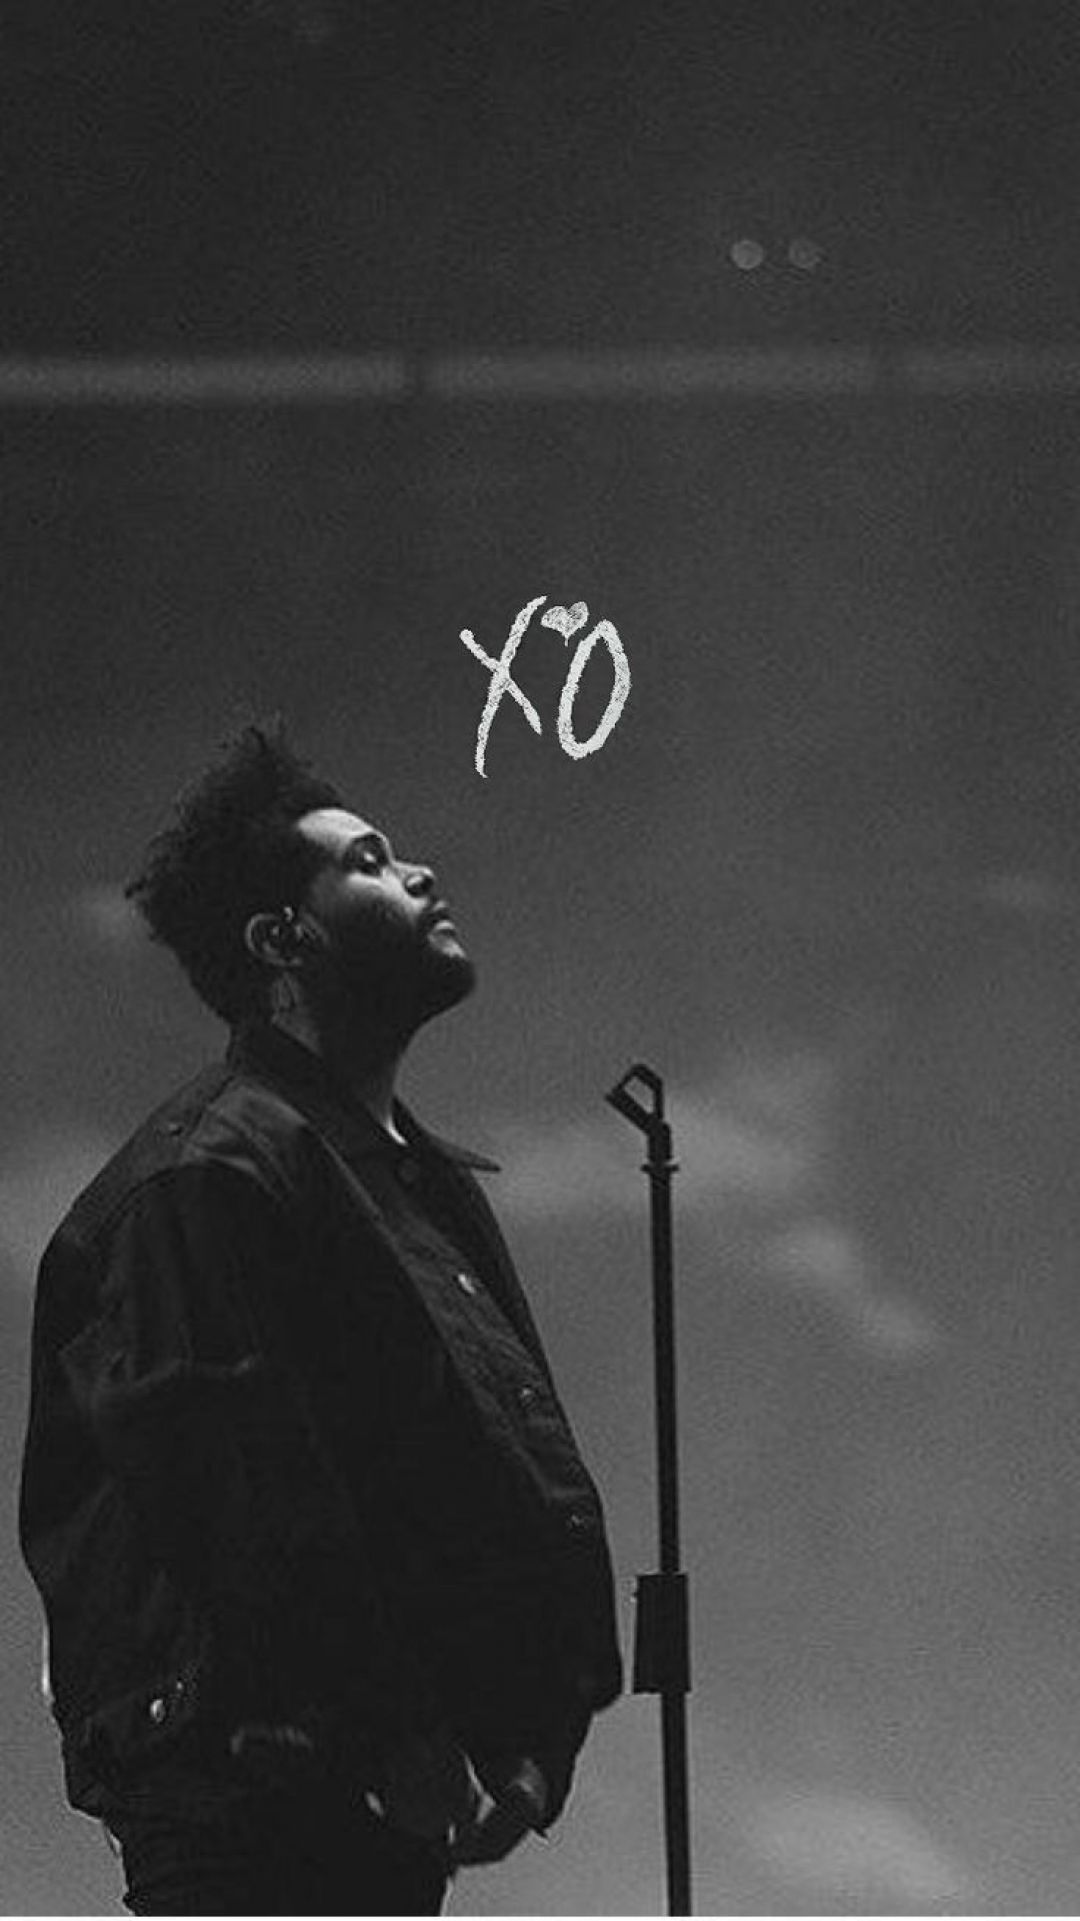 ✓[105+] The Weeknd - Android, iPhone, Desktop HD Backgrounds / Wallpapers  (1080p, 4k) (png / jpg) (2023)